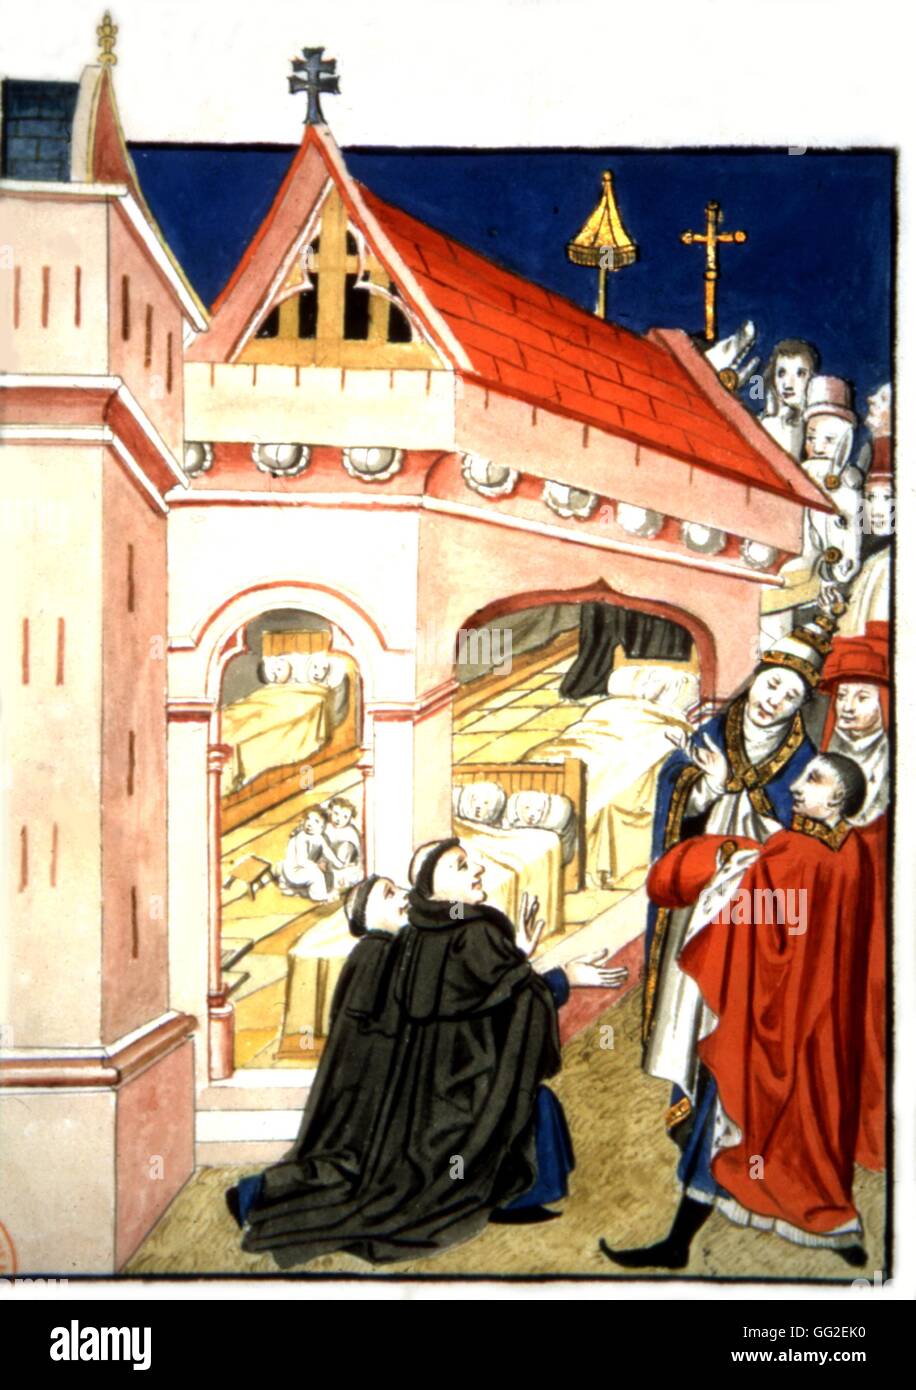 The Pope showing Duke of Burgundy the hospital in Rome. in 'History of St. Esprit Hospital in Dijon' Middle Ages France Paris. Bibliothèque de la Sorbonne Stock Photo